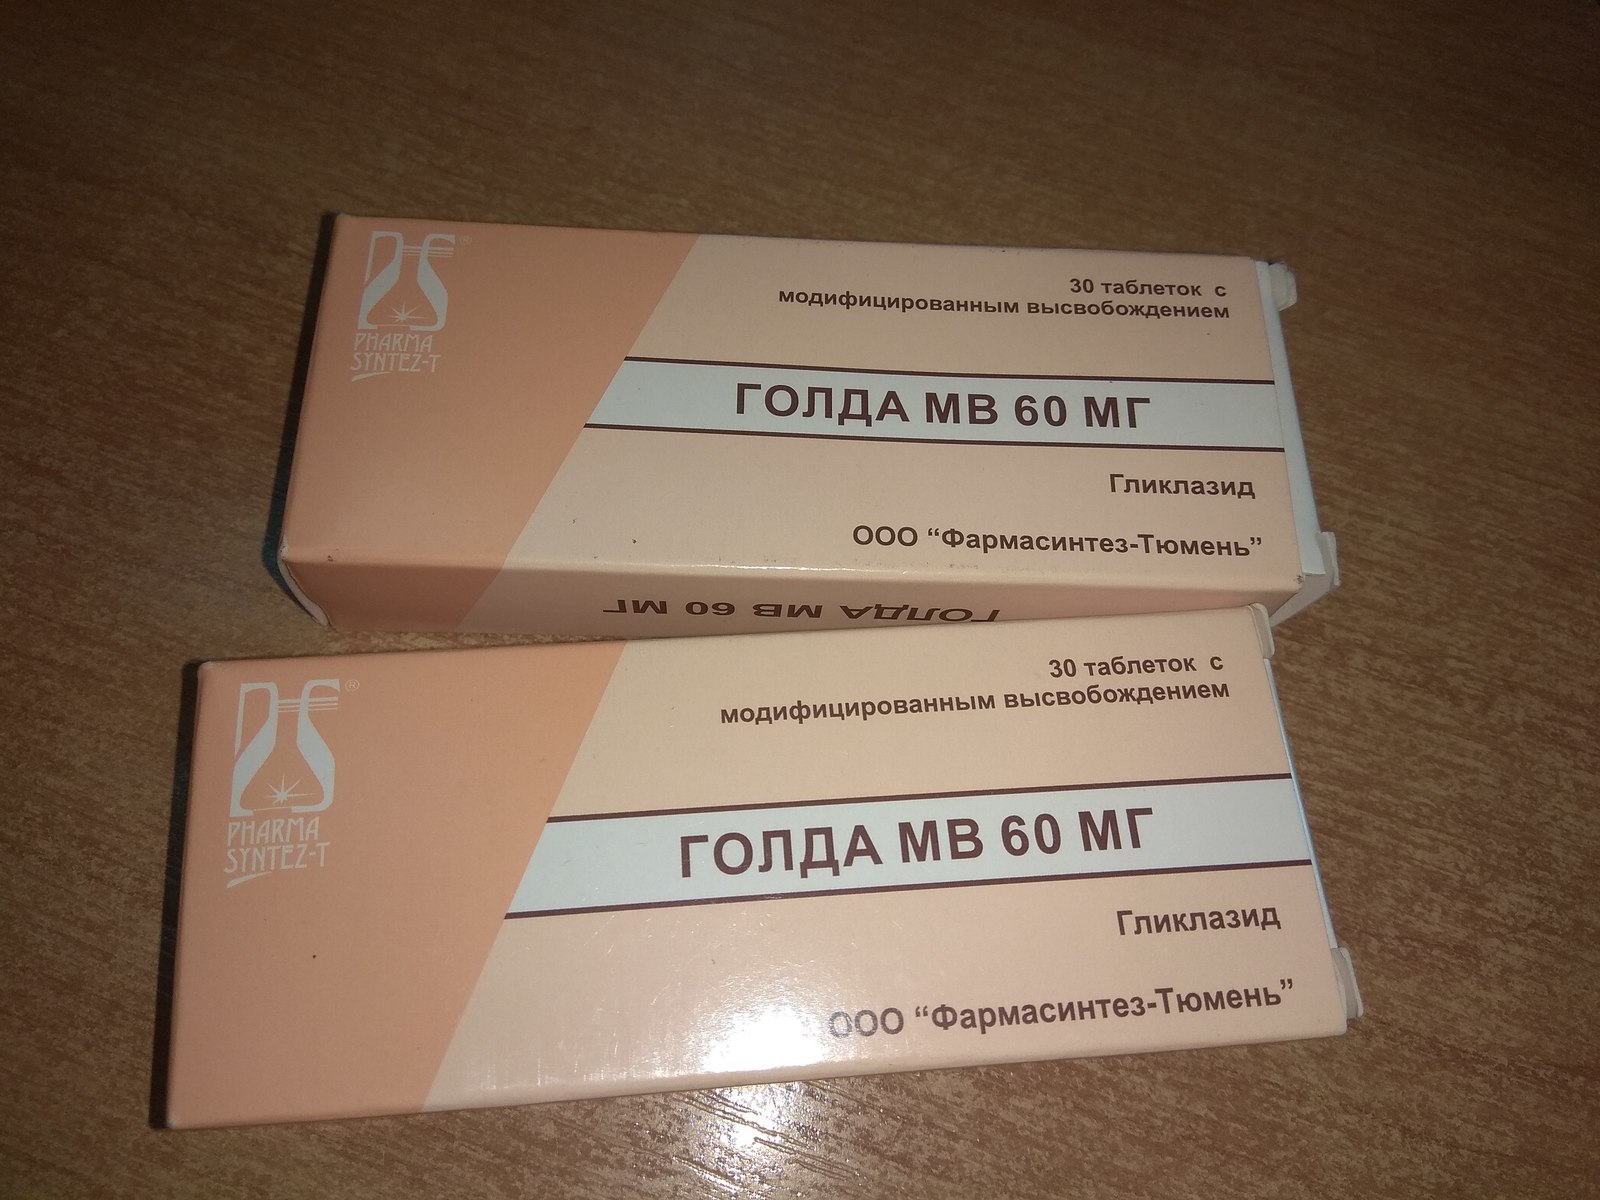 I will give medicines GOLDA MV 60 mg - My, Medications, Gold, I will give, Diabetes, Moscow